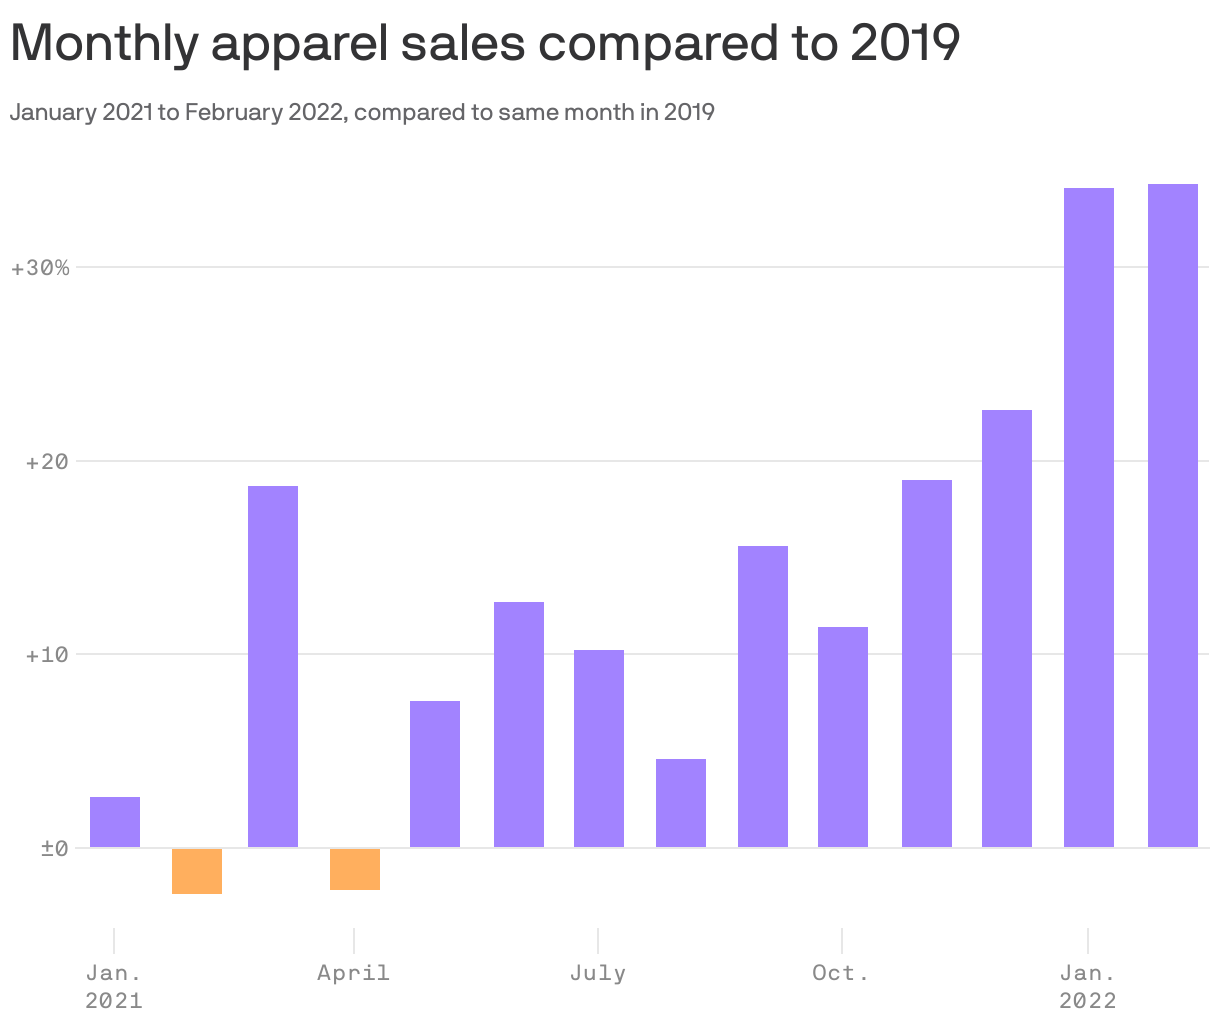 Monthly apparel sales compared to 2019